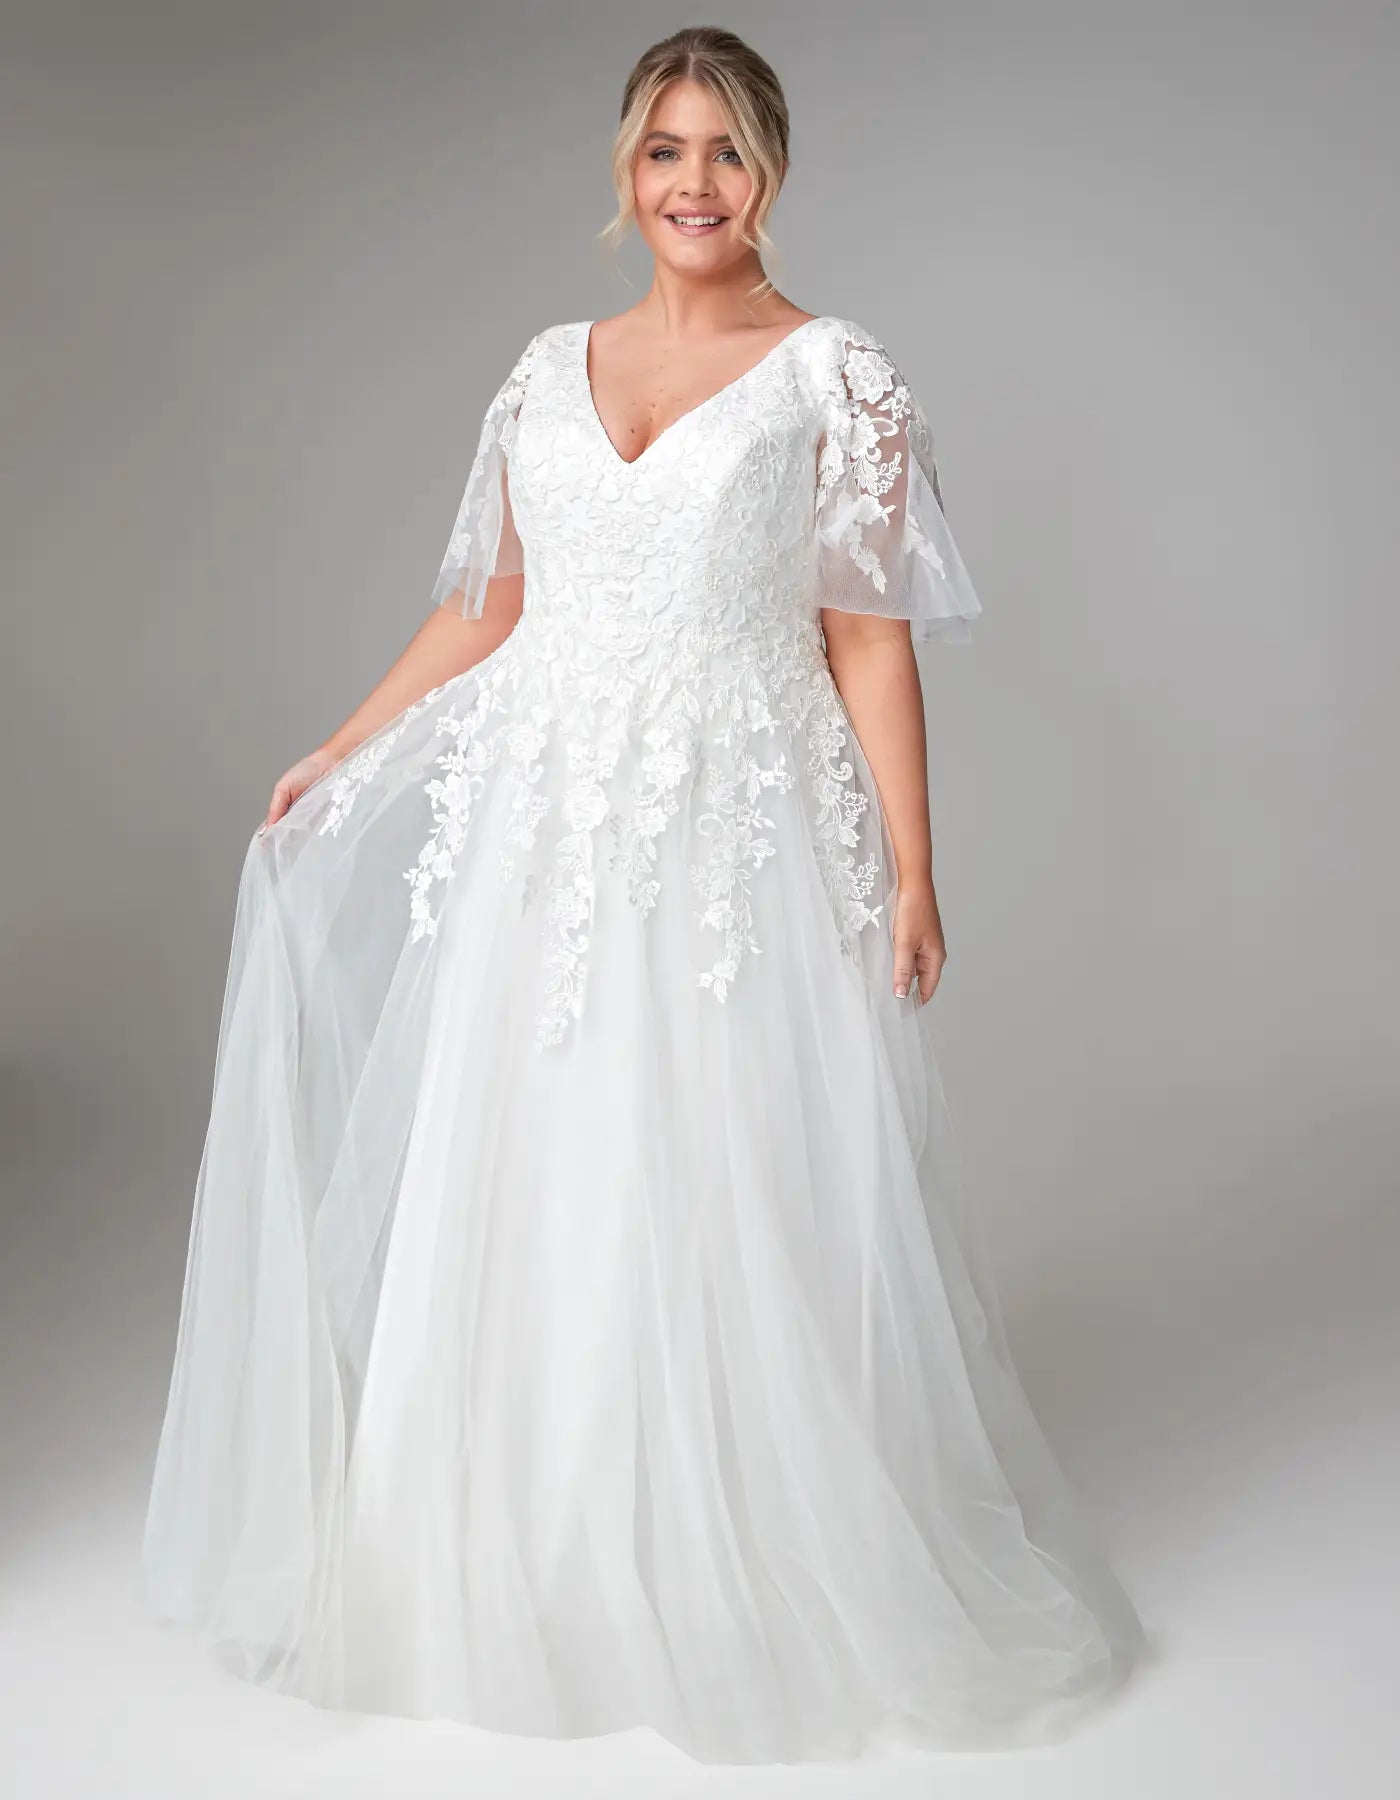 AerbaDress a floaty gown with angel sleeves Wedding Dresses